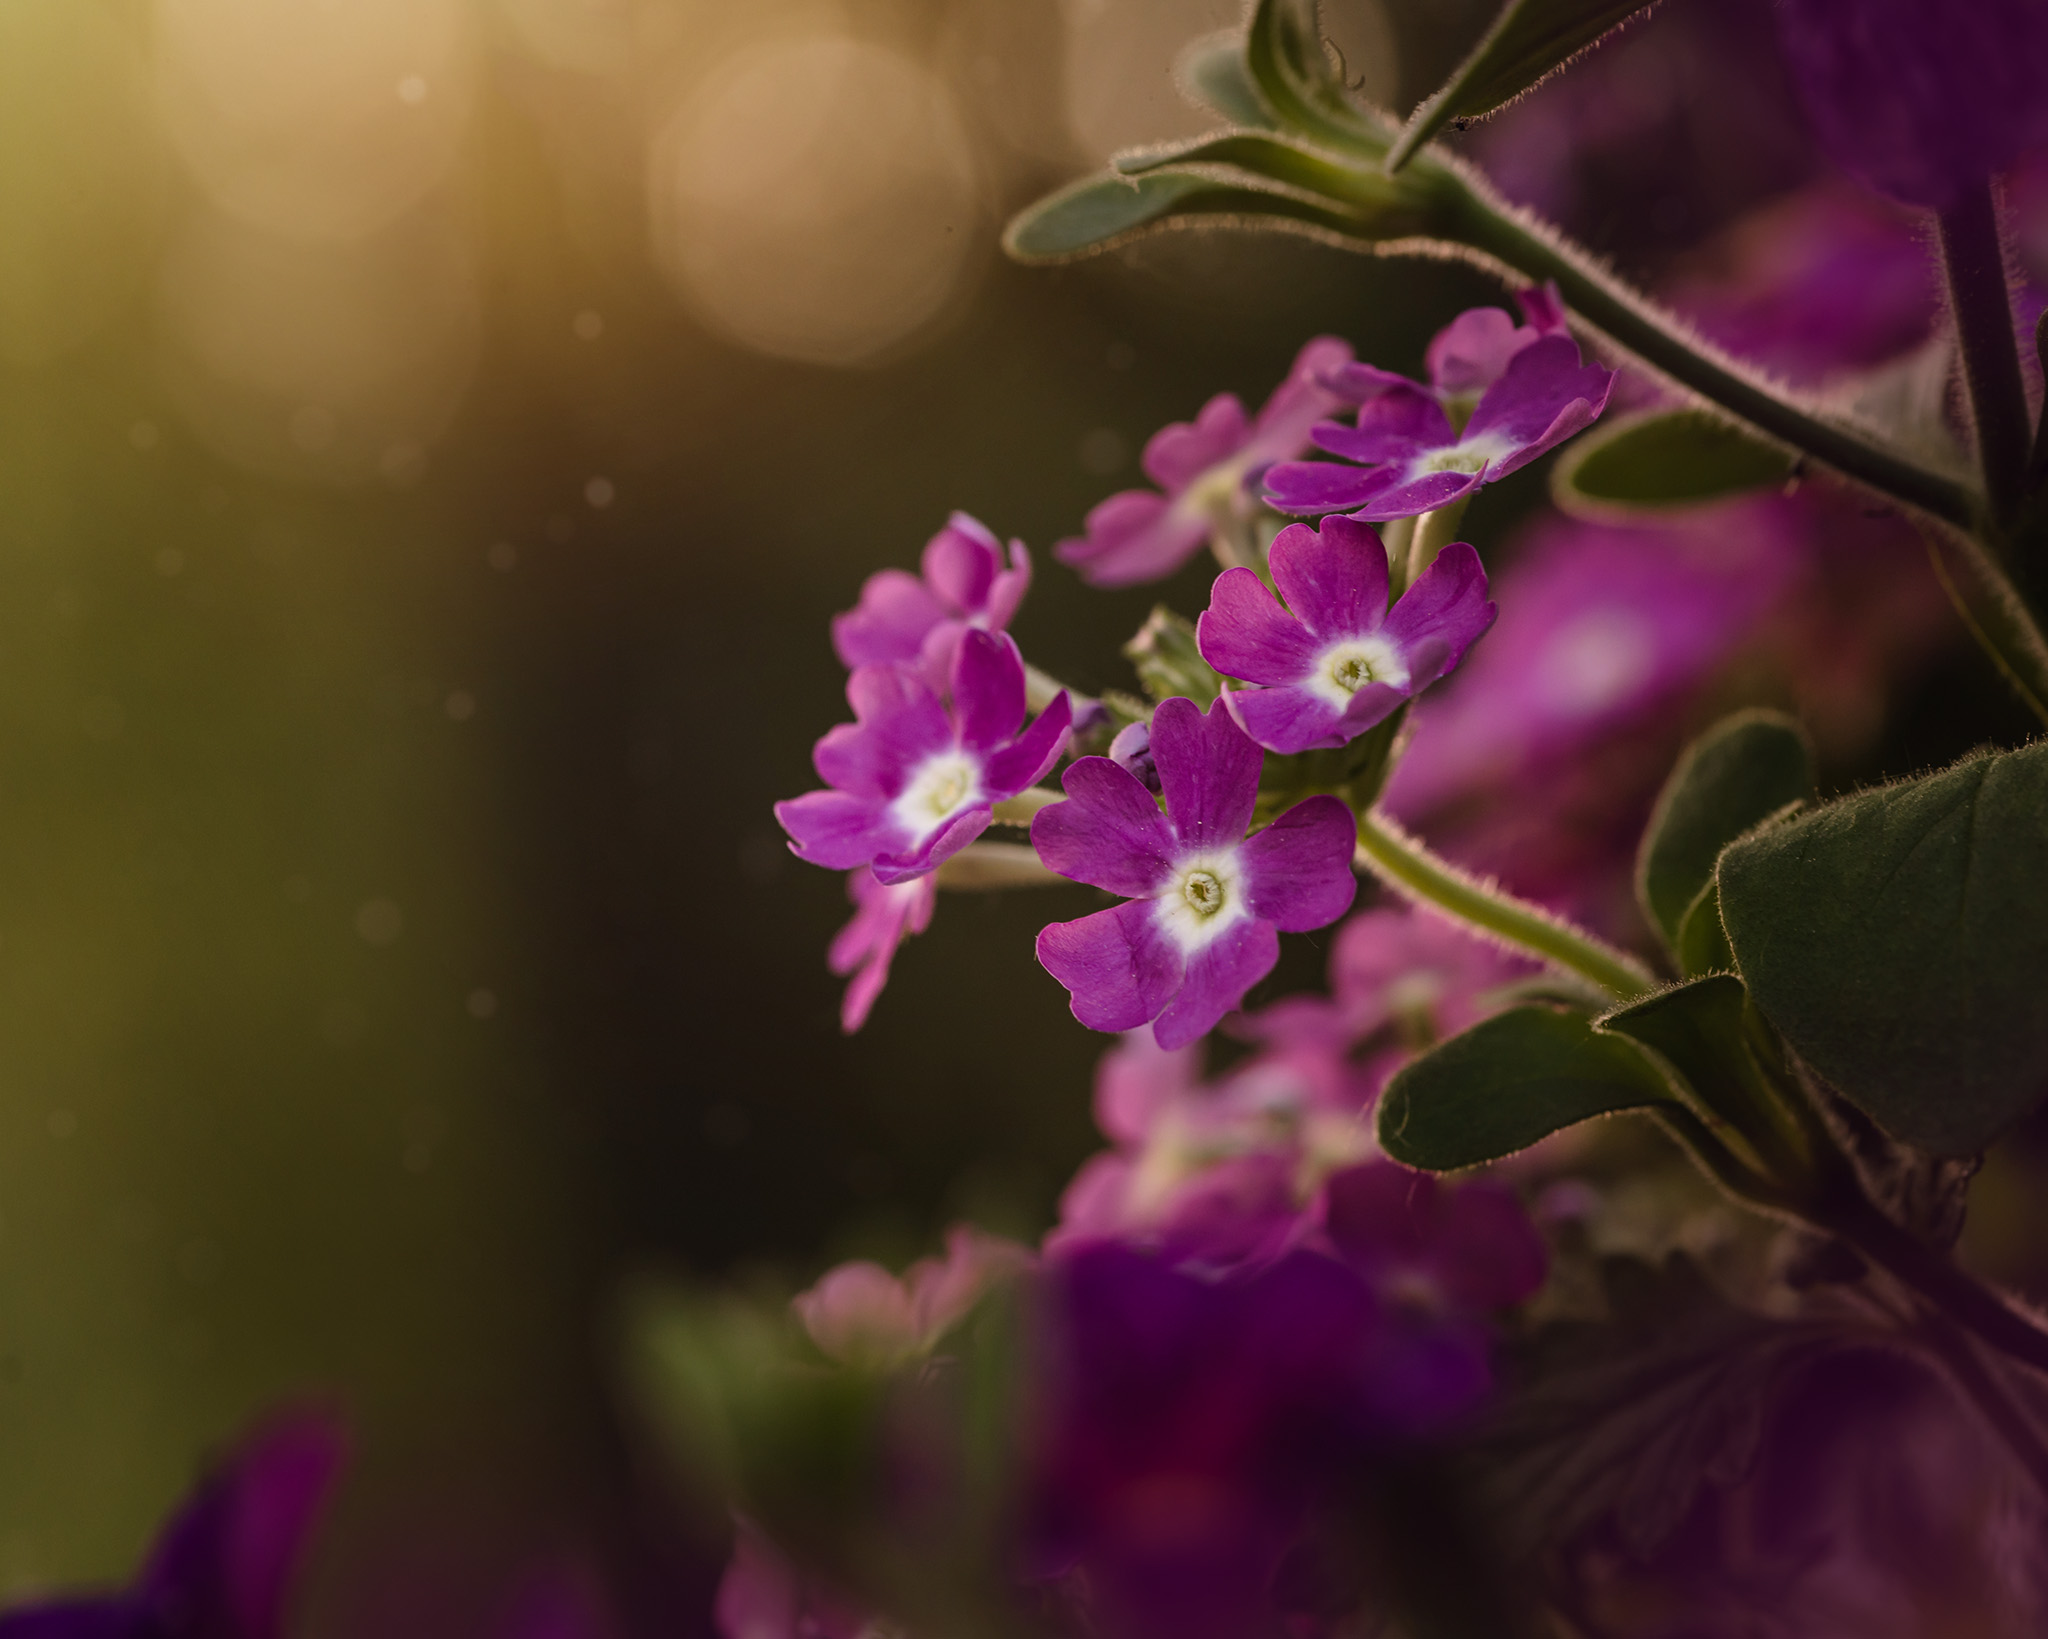 Finding Beauty in Nature: Small purple flowers